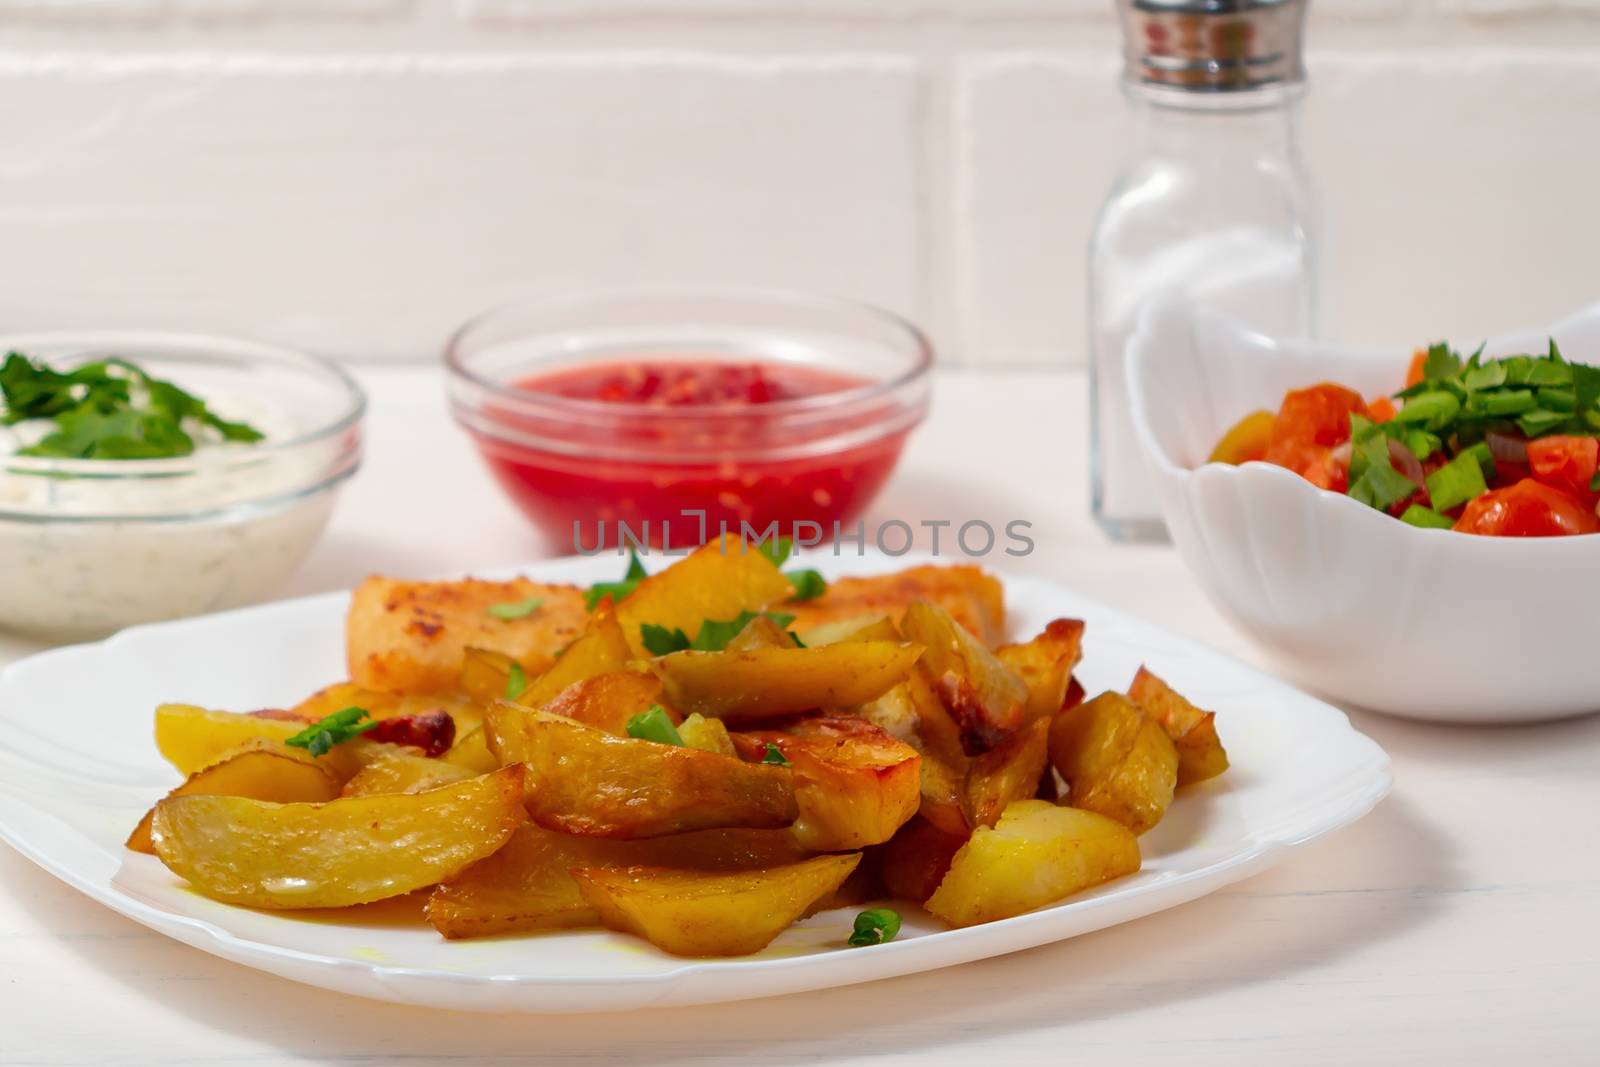 Fried fish and chips on a white plate on the kitchen table with tomato sauce, tartar sauce and pickled vegetables salad - photo, image by galsand